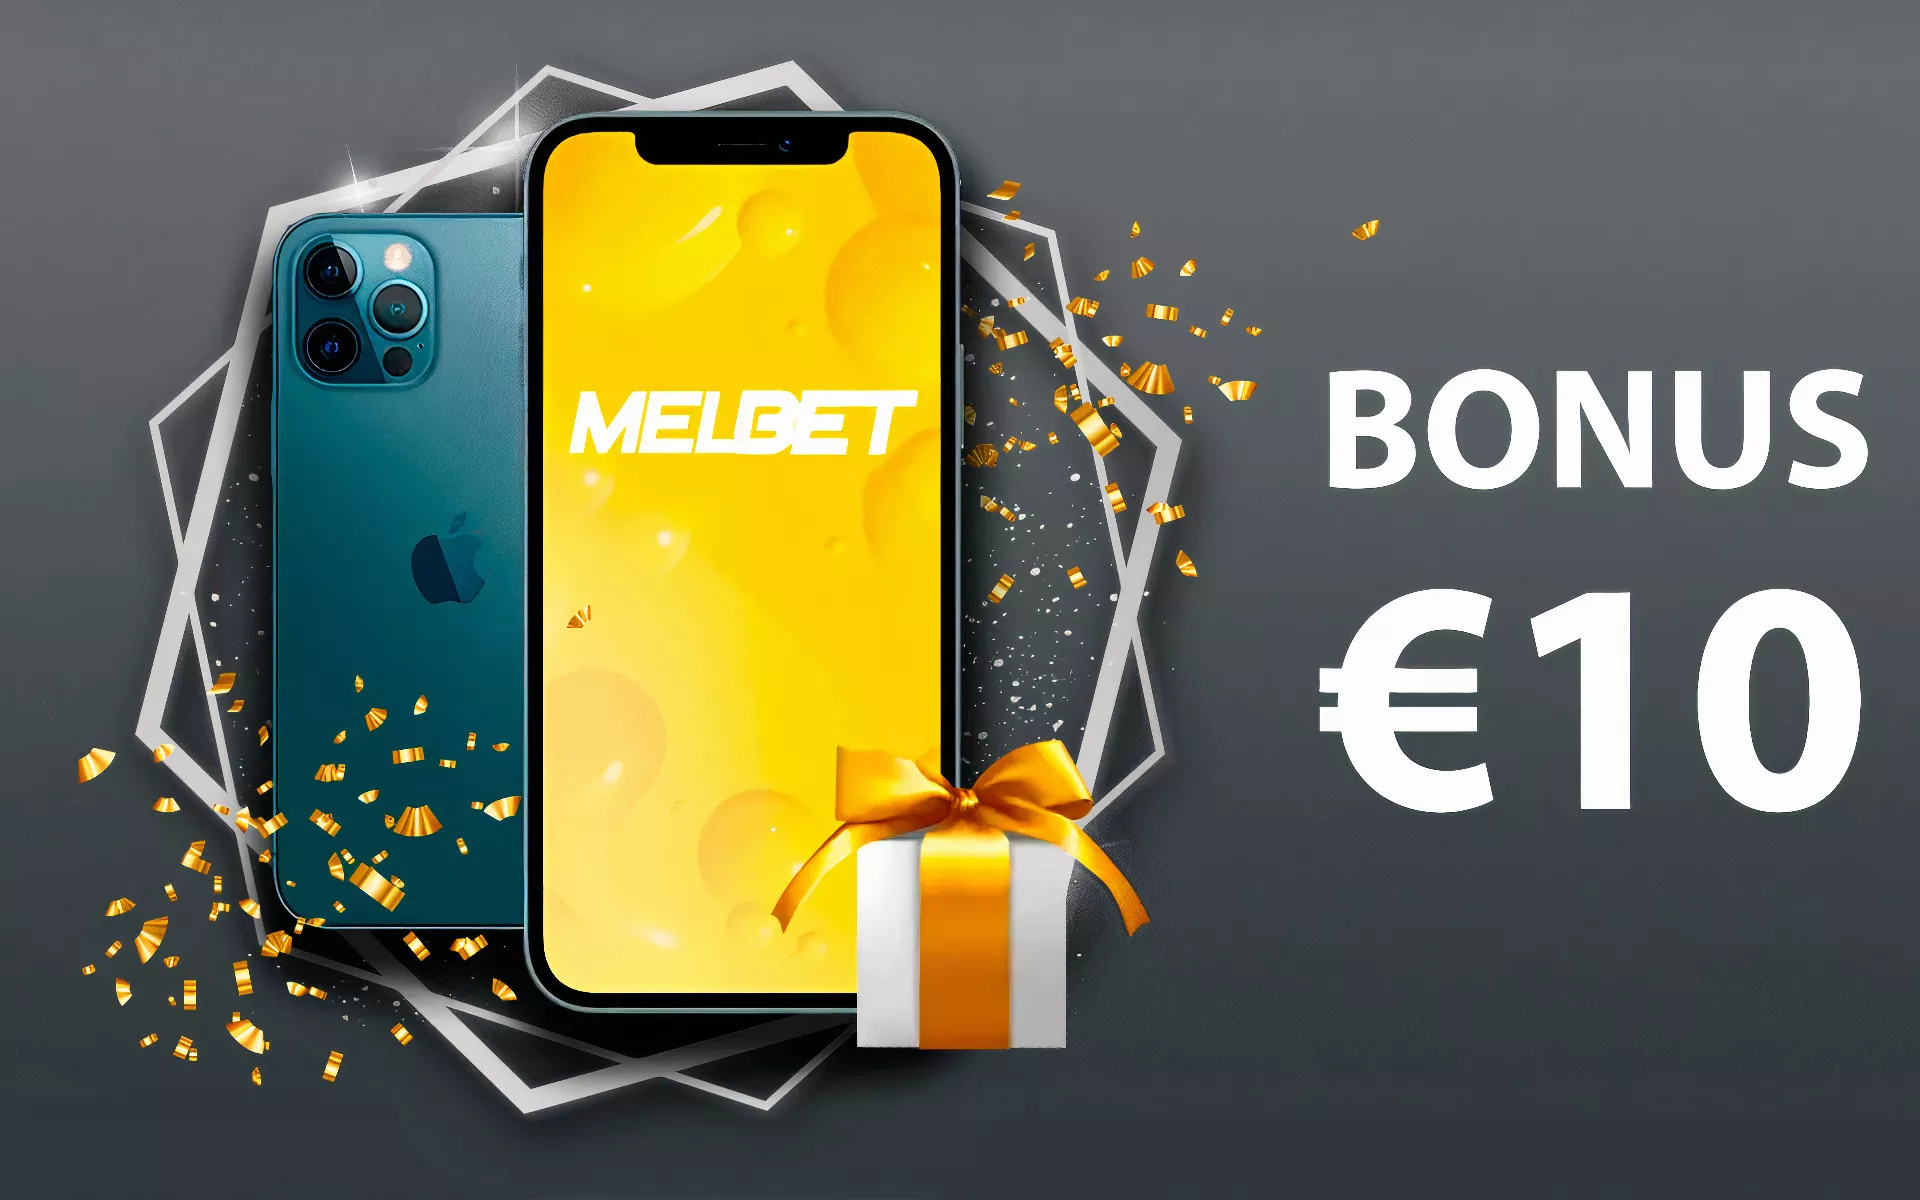 Downloading the MelBet app will give your a special profit.